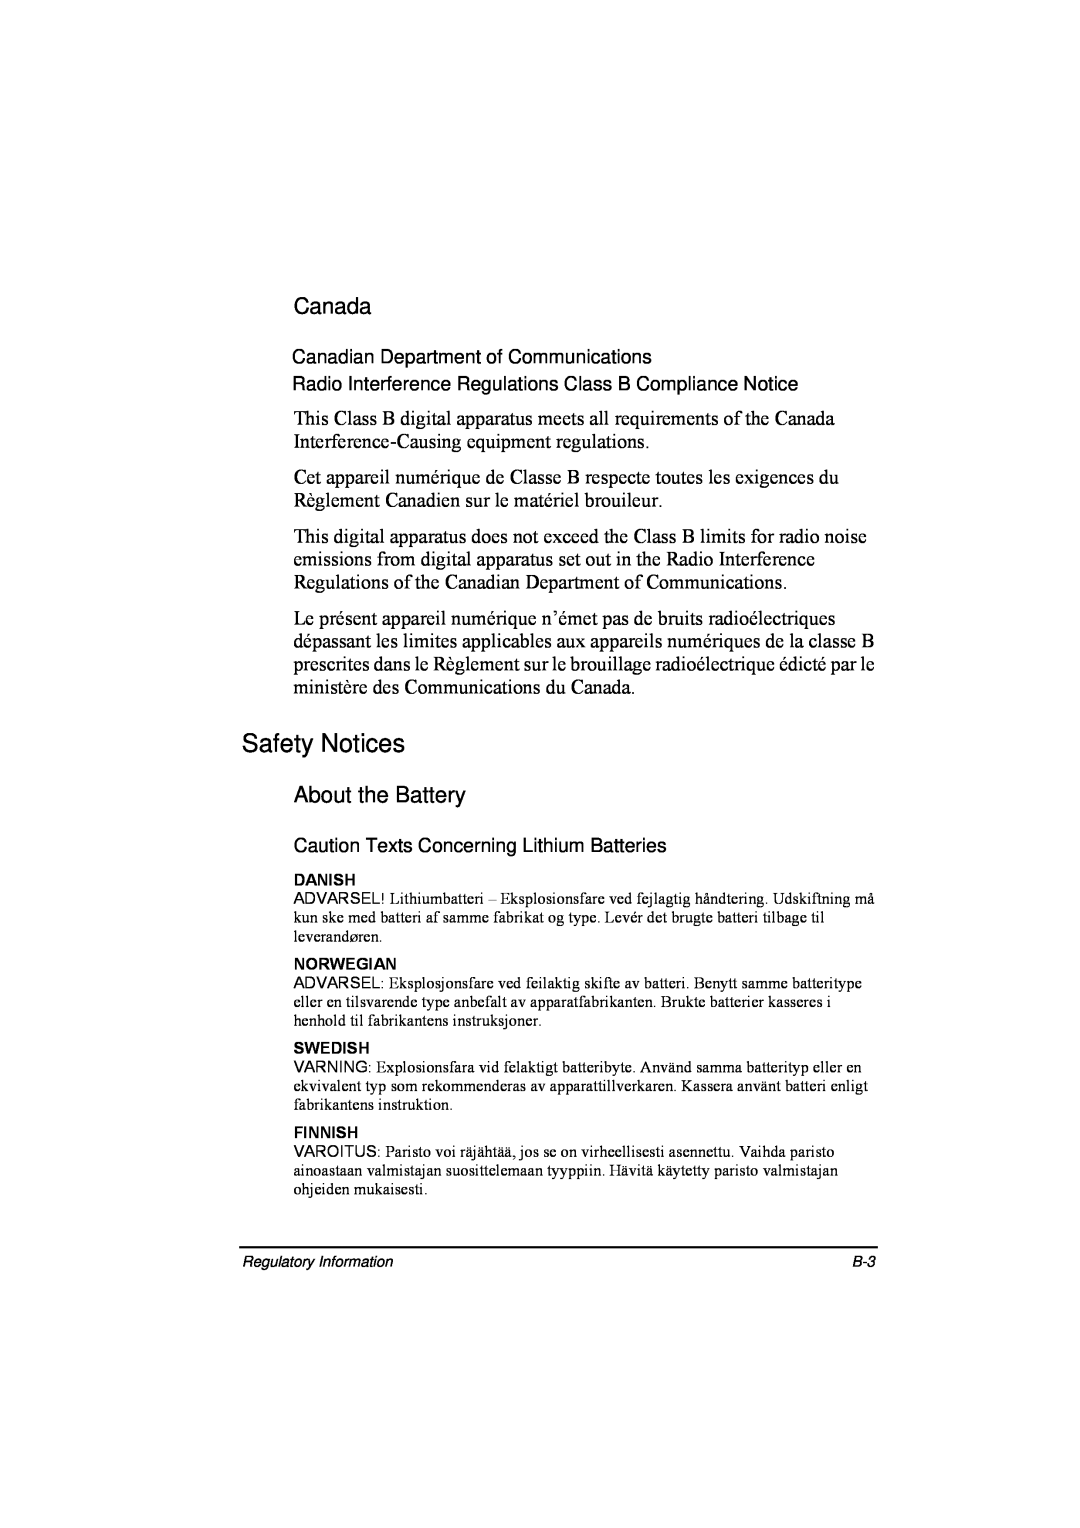 TAG 20 Series Canada, Canadian Department of Communications, Radio Interference Regulations Class B Compliance Notice 